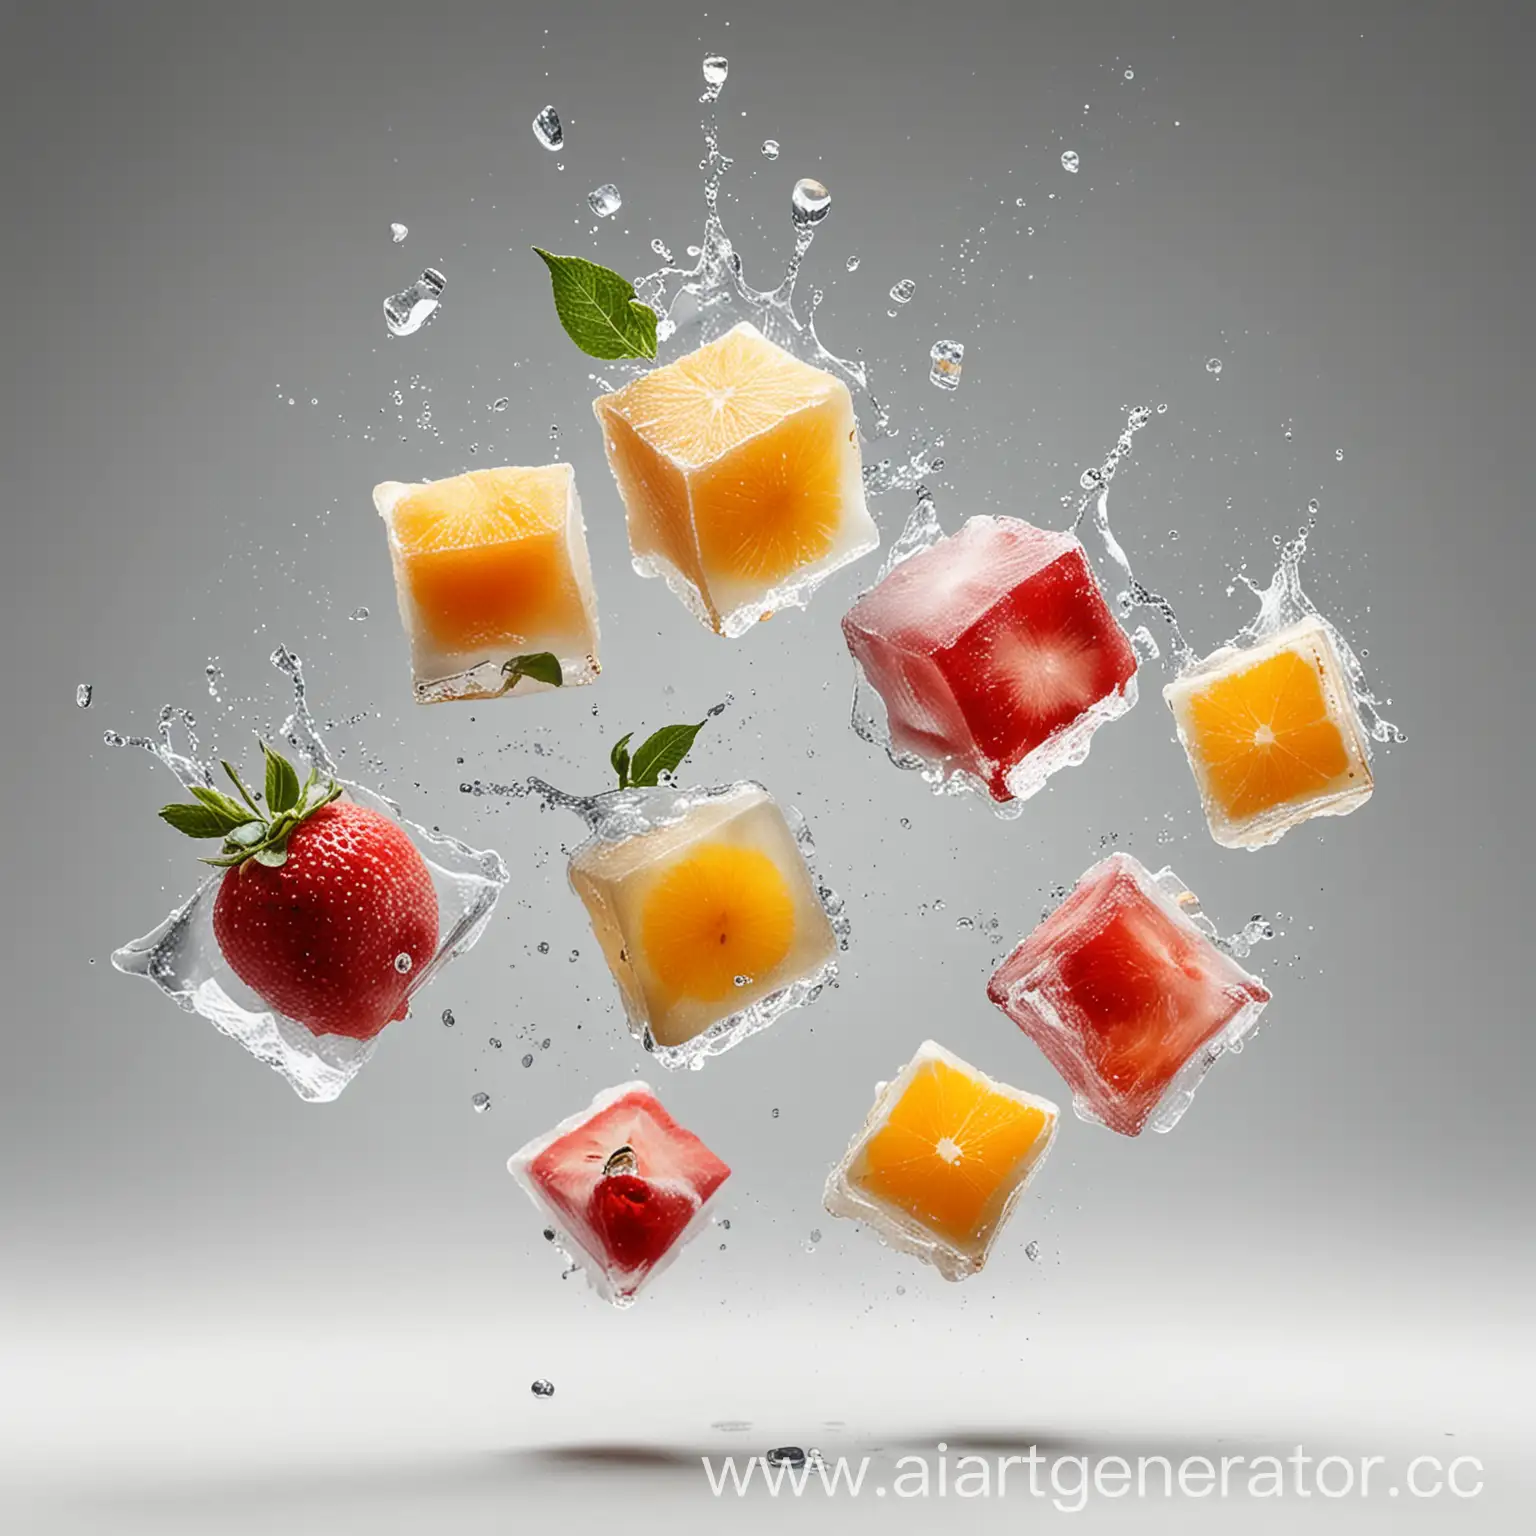 Colorful-Flying-Ice-Cubes-and-Fruit-on-Clean-White-Background